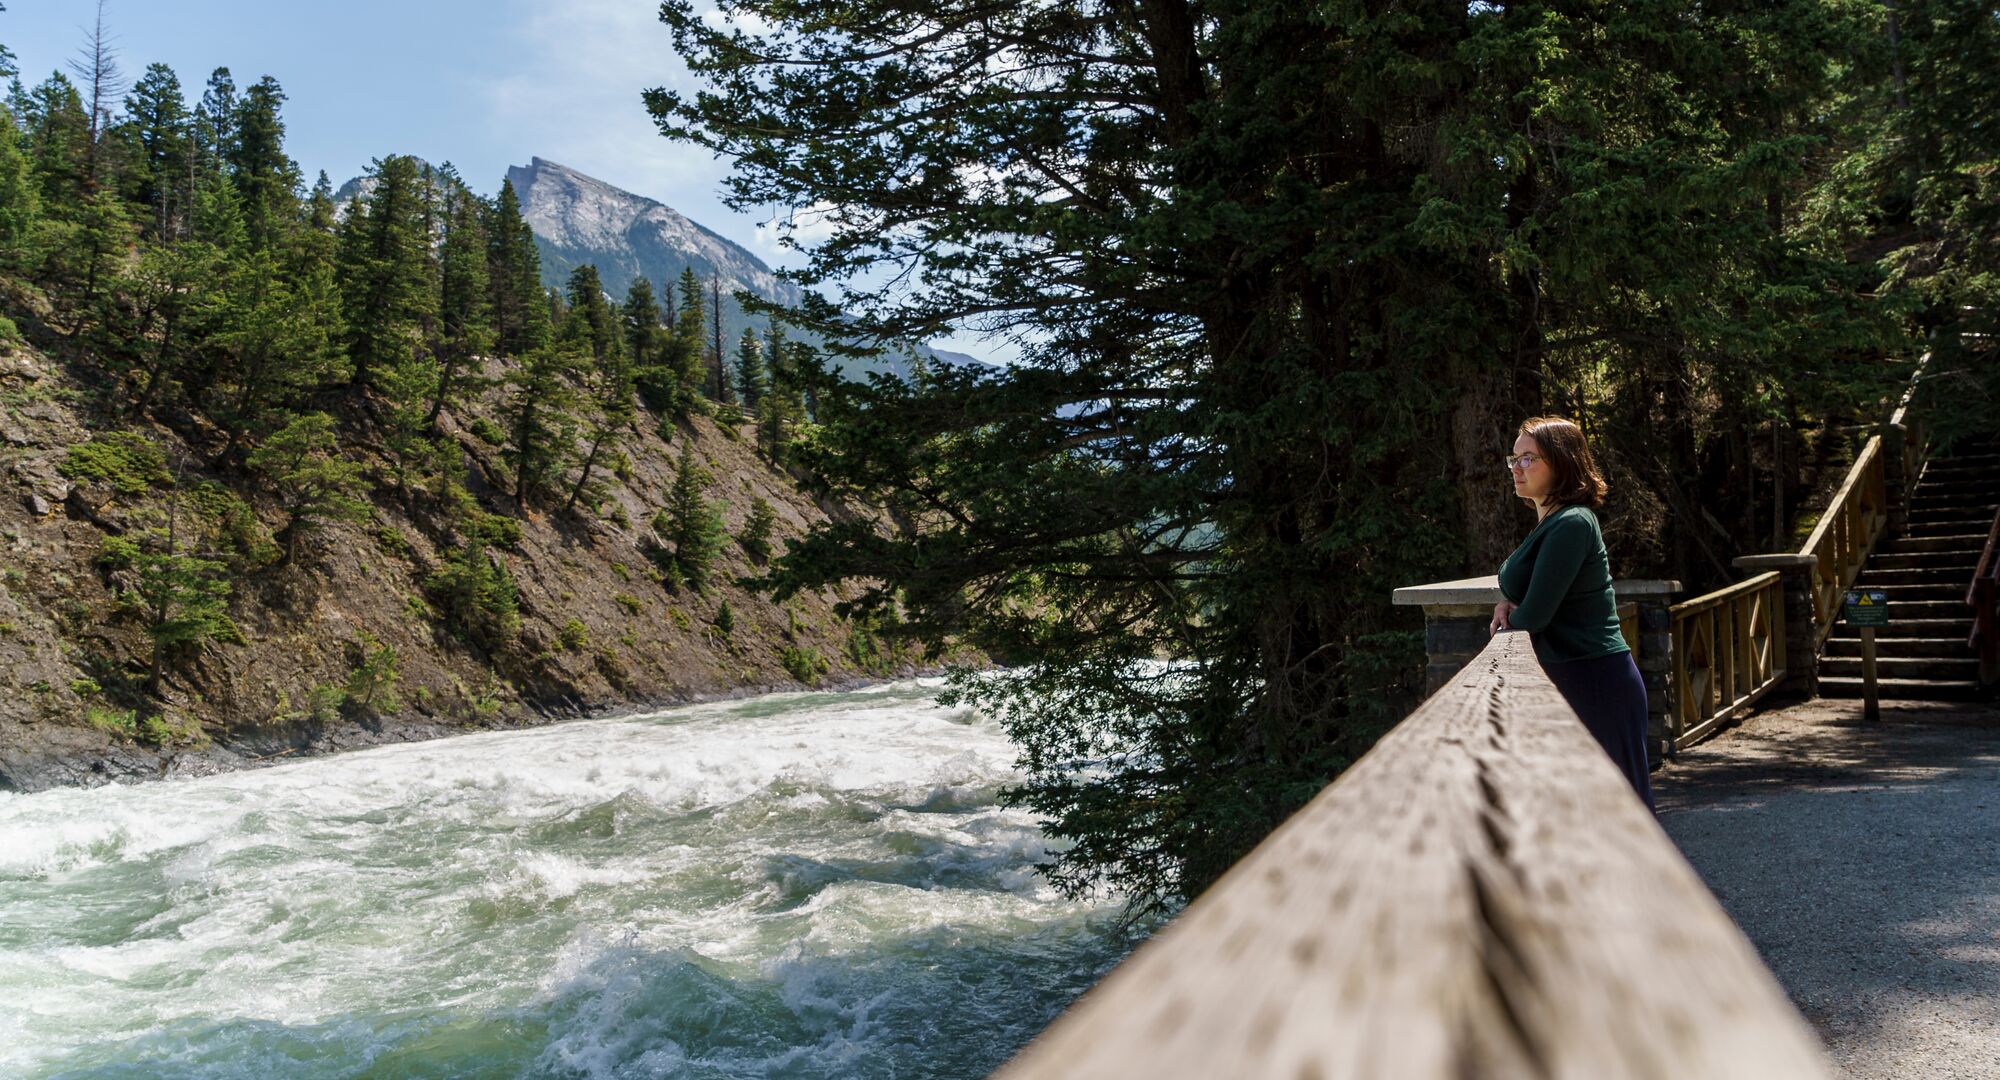 A person taking a break on the Bow River Trail on the way to Bow Falls